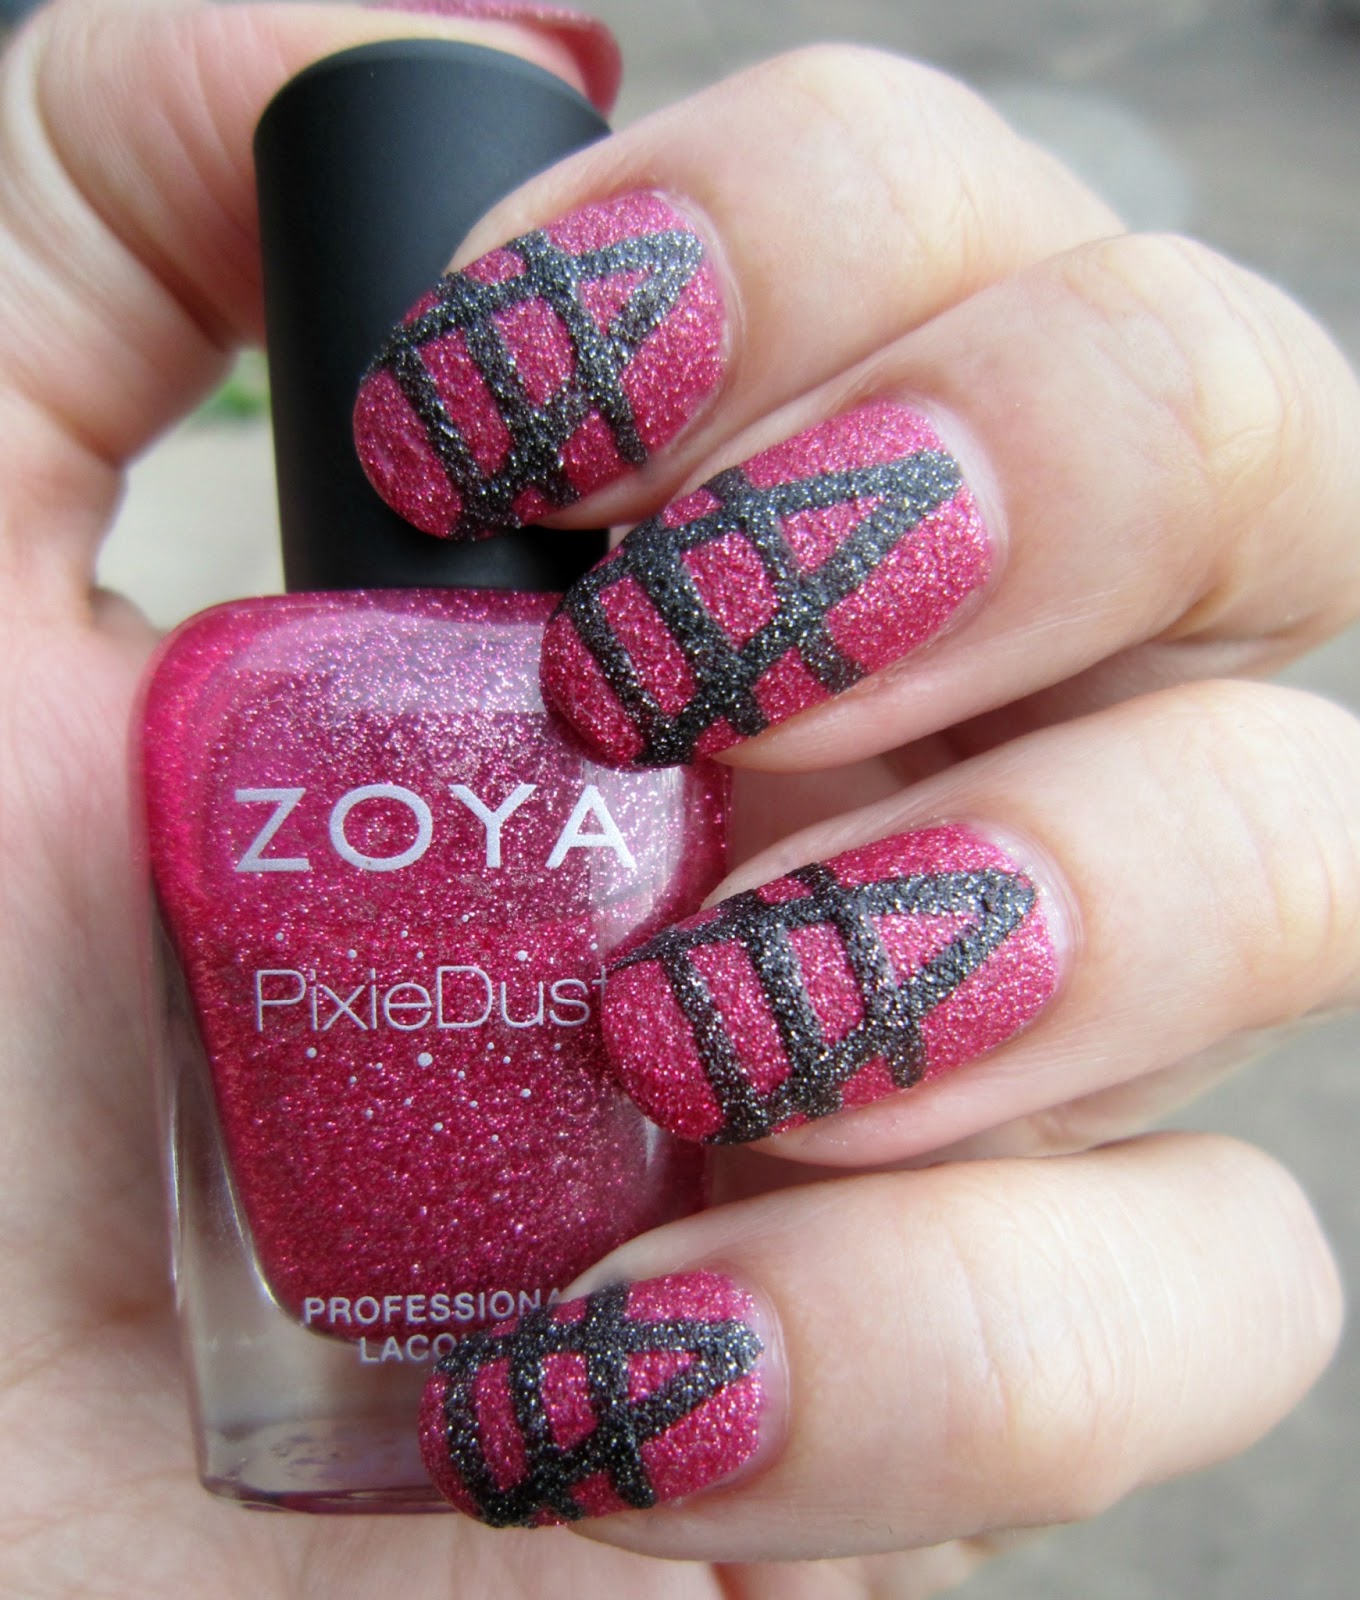 Concrete and Nail Polish: Another Art Deco Nail Art Attempt With Zoya ...